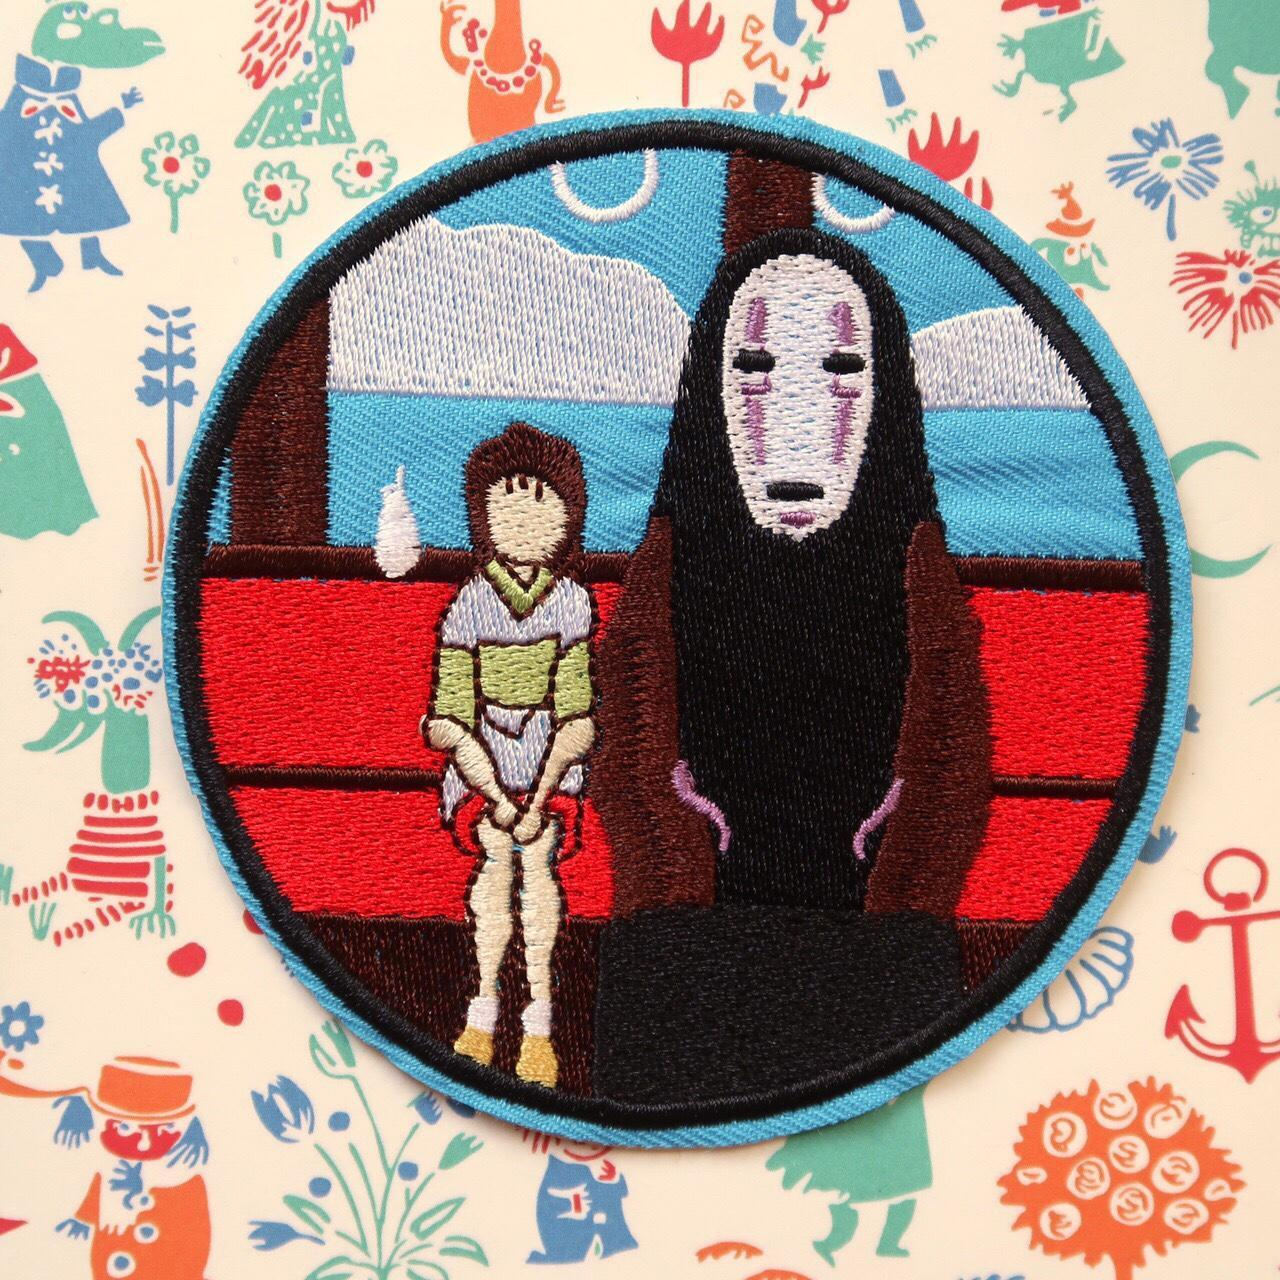 No Face and Chihiro on train Spirited Away Embroidered Iron-On Patch